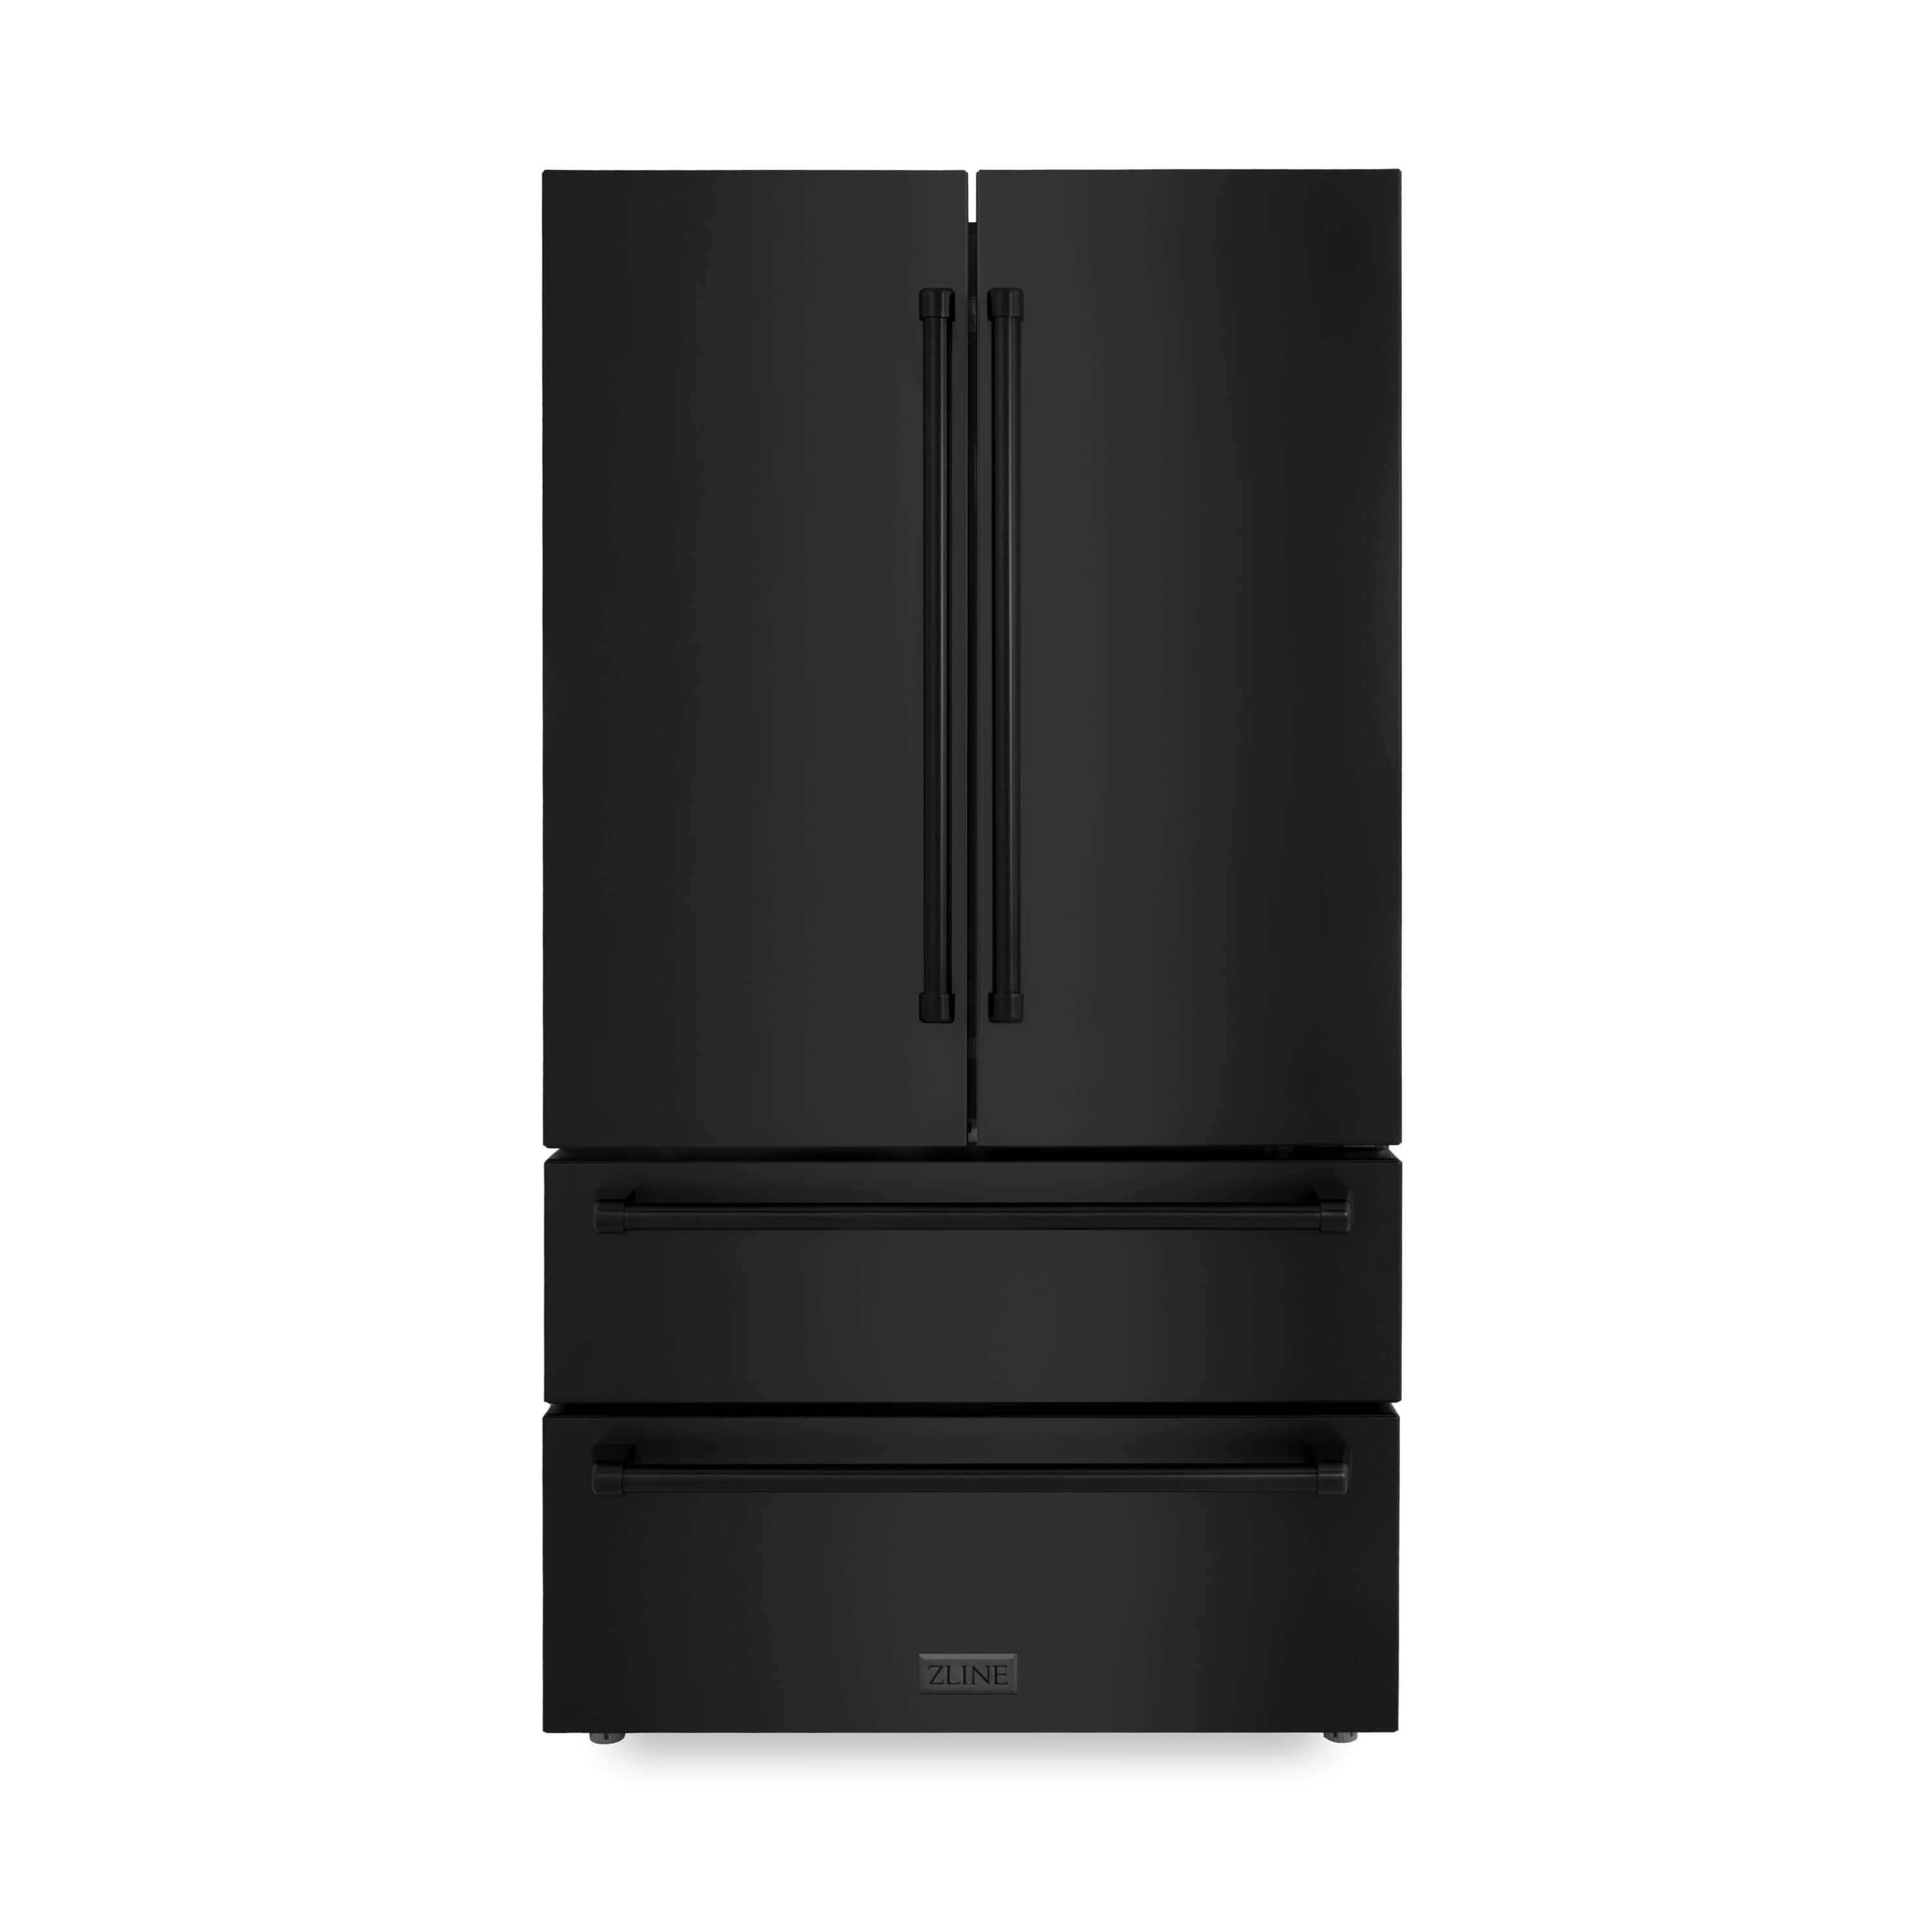 ZLINE 36 in. Freestanding French Door Refrigerator with Ice Maker in Black Stainless Steel (RFM-36-BS) front, closed.